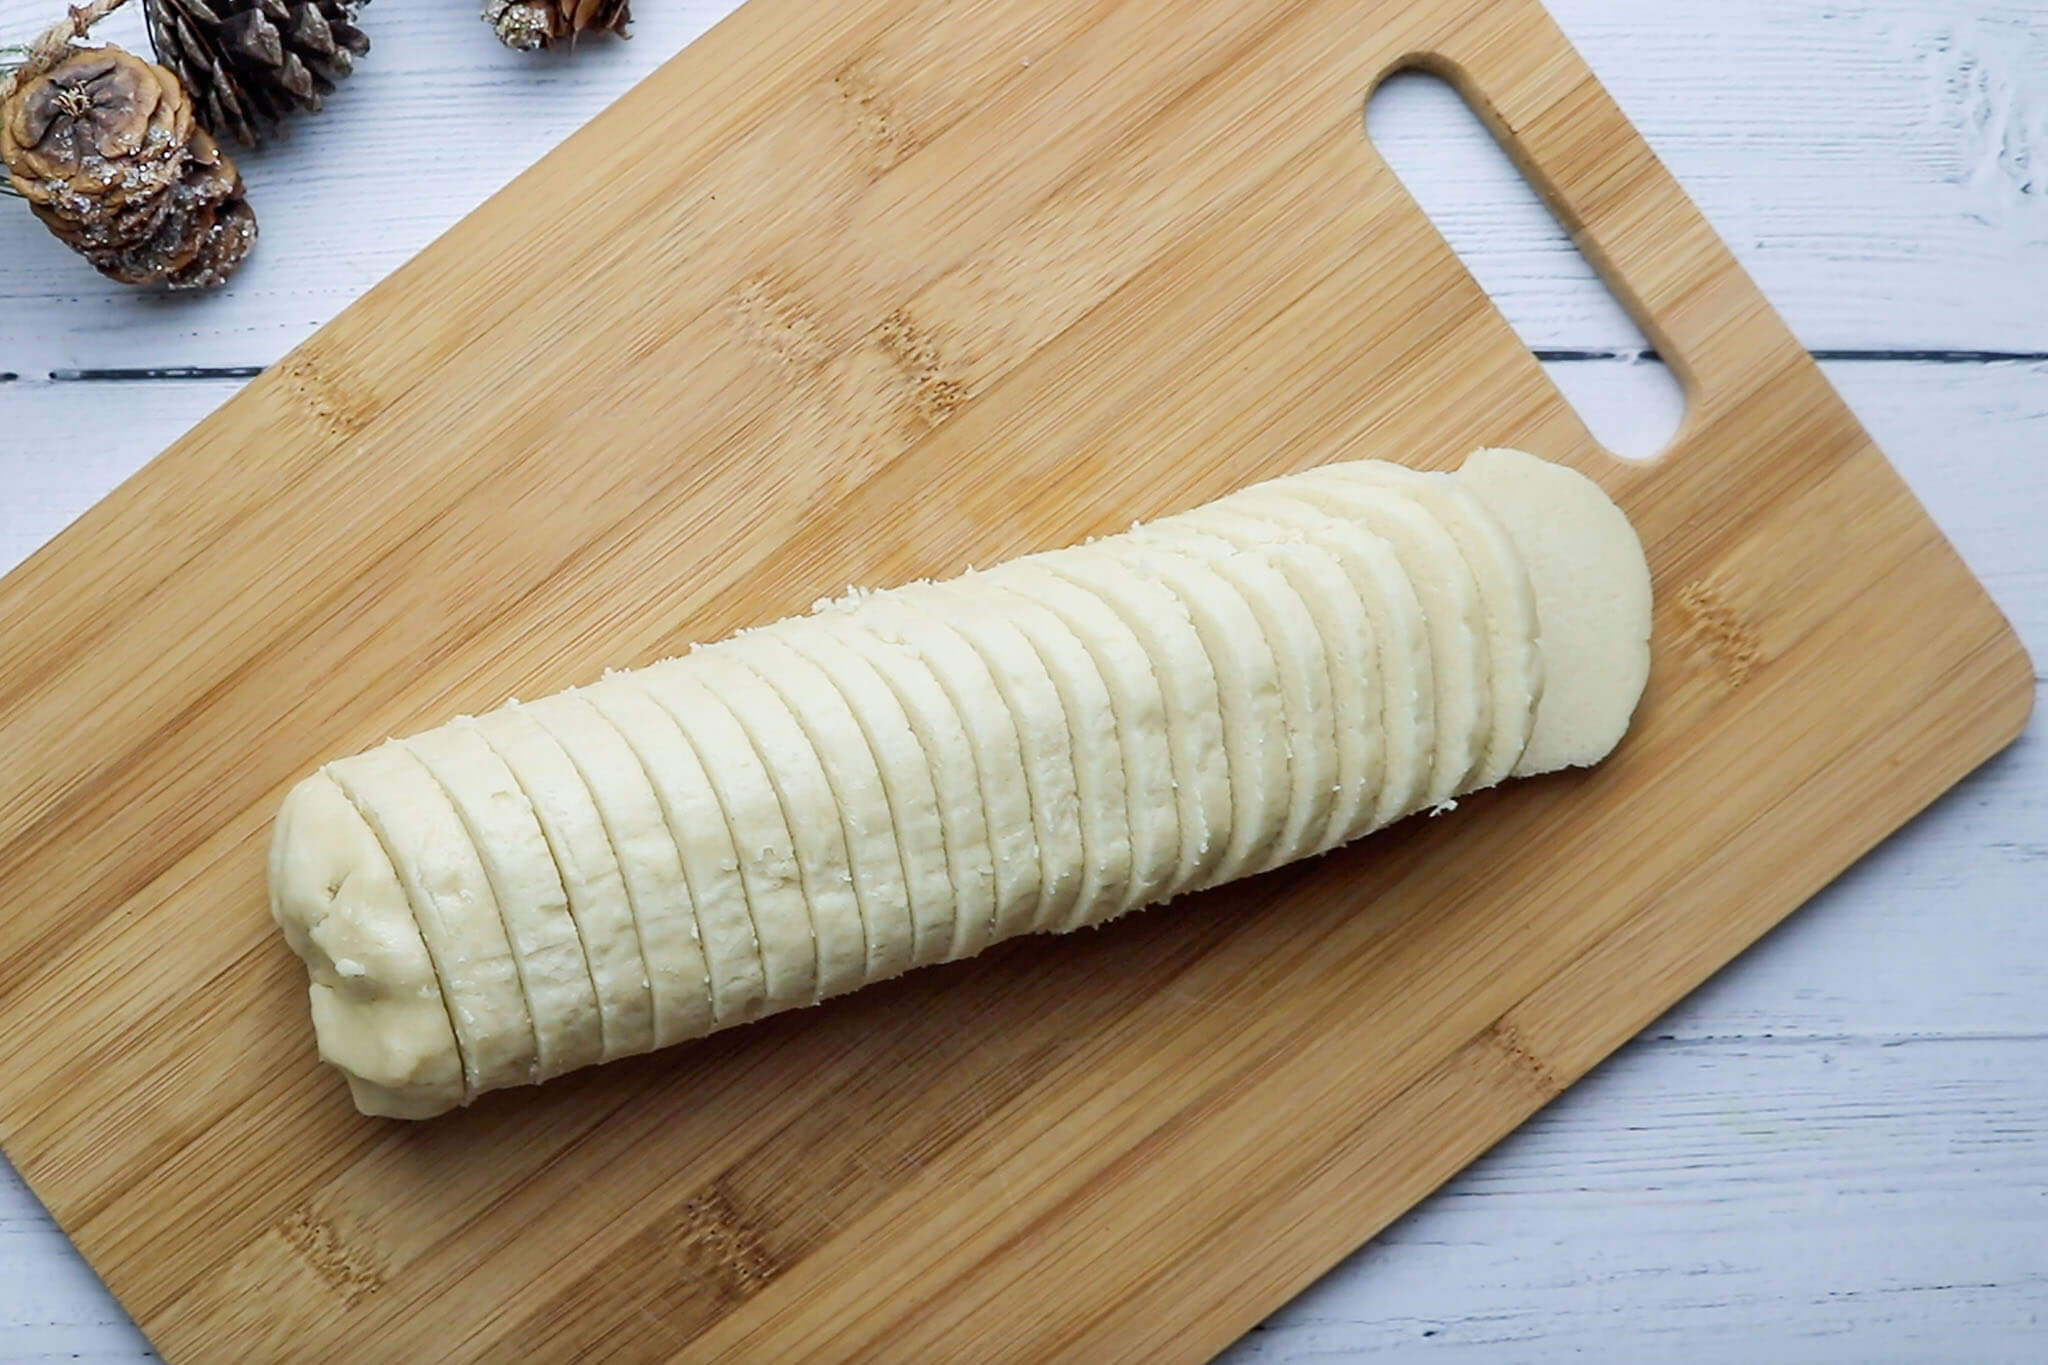 Sugar cookie dough tube sliced evenly